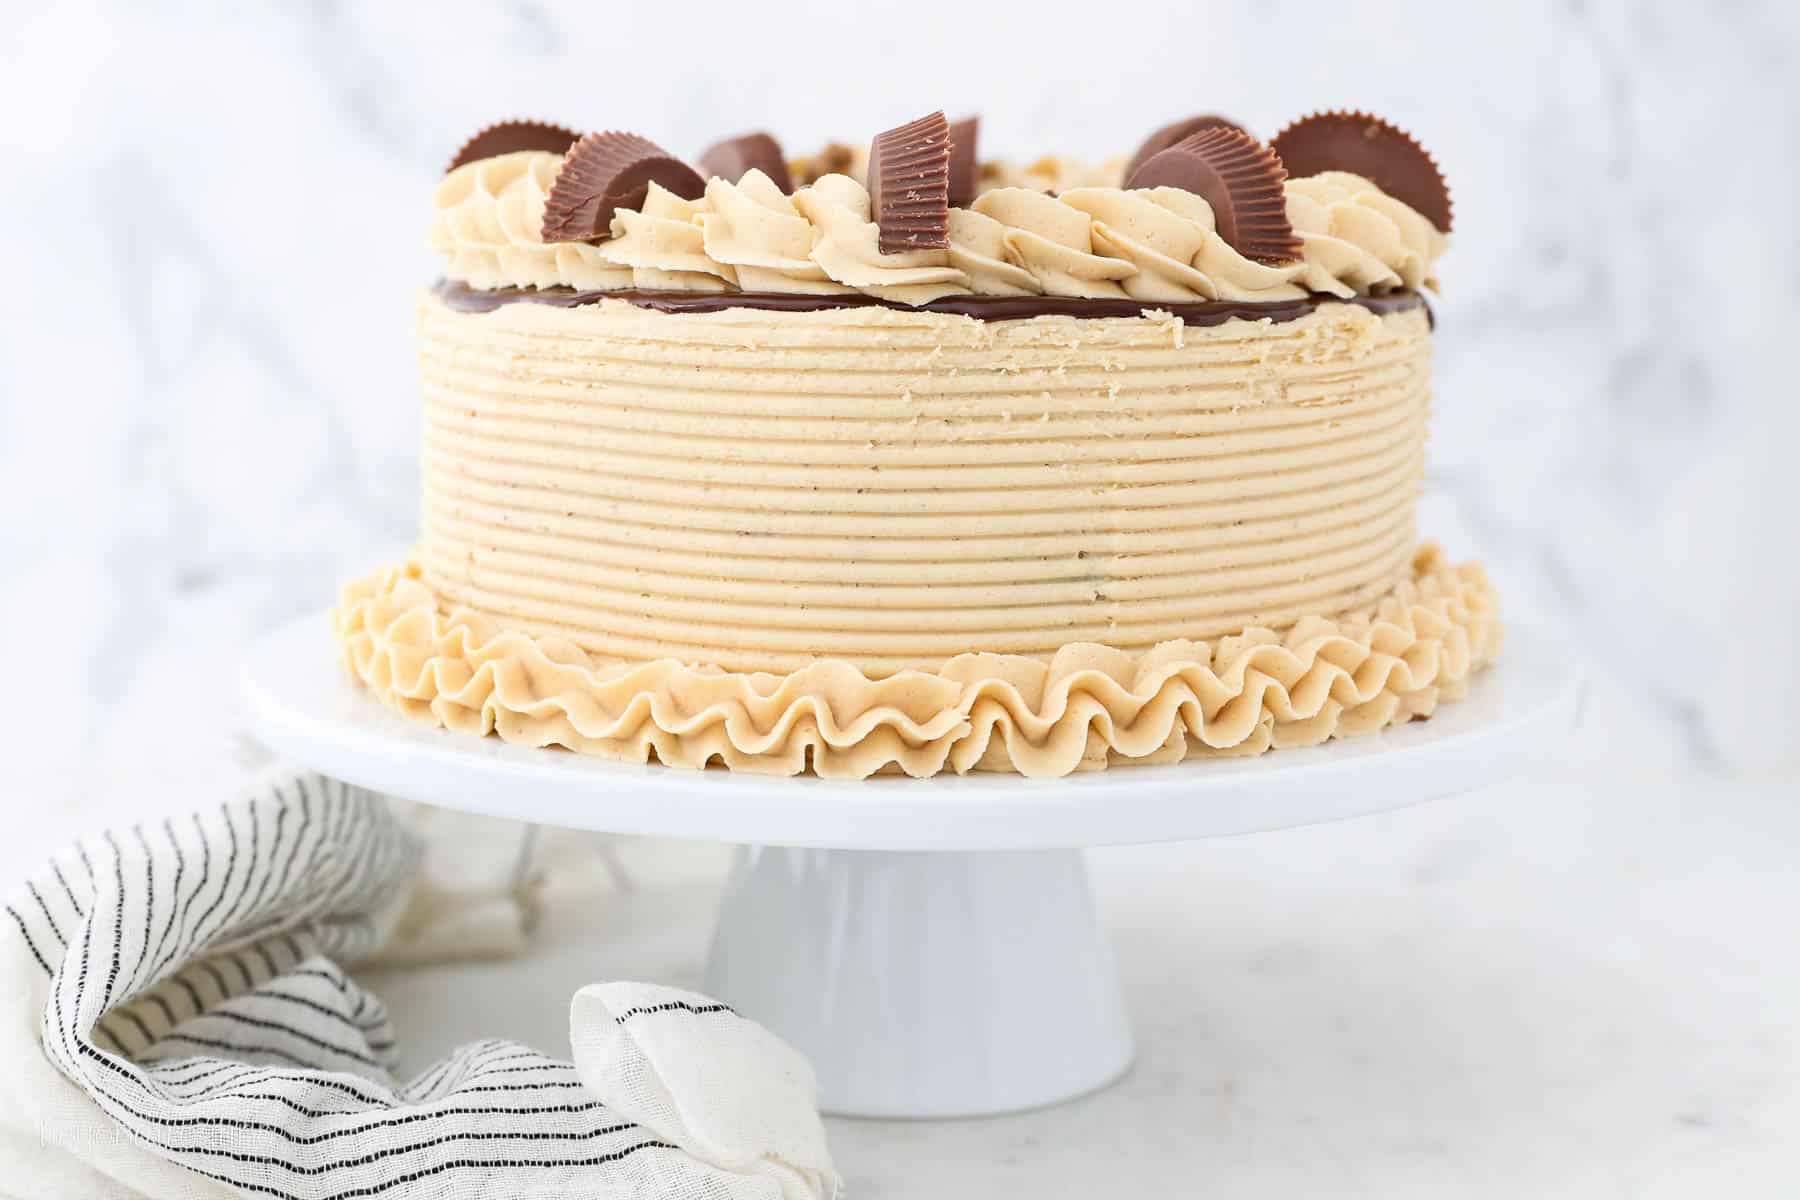 Frosted chocolate peanut butter layer cake on a white cake stand.